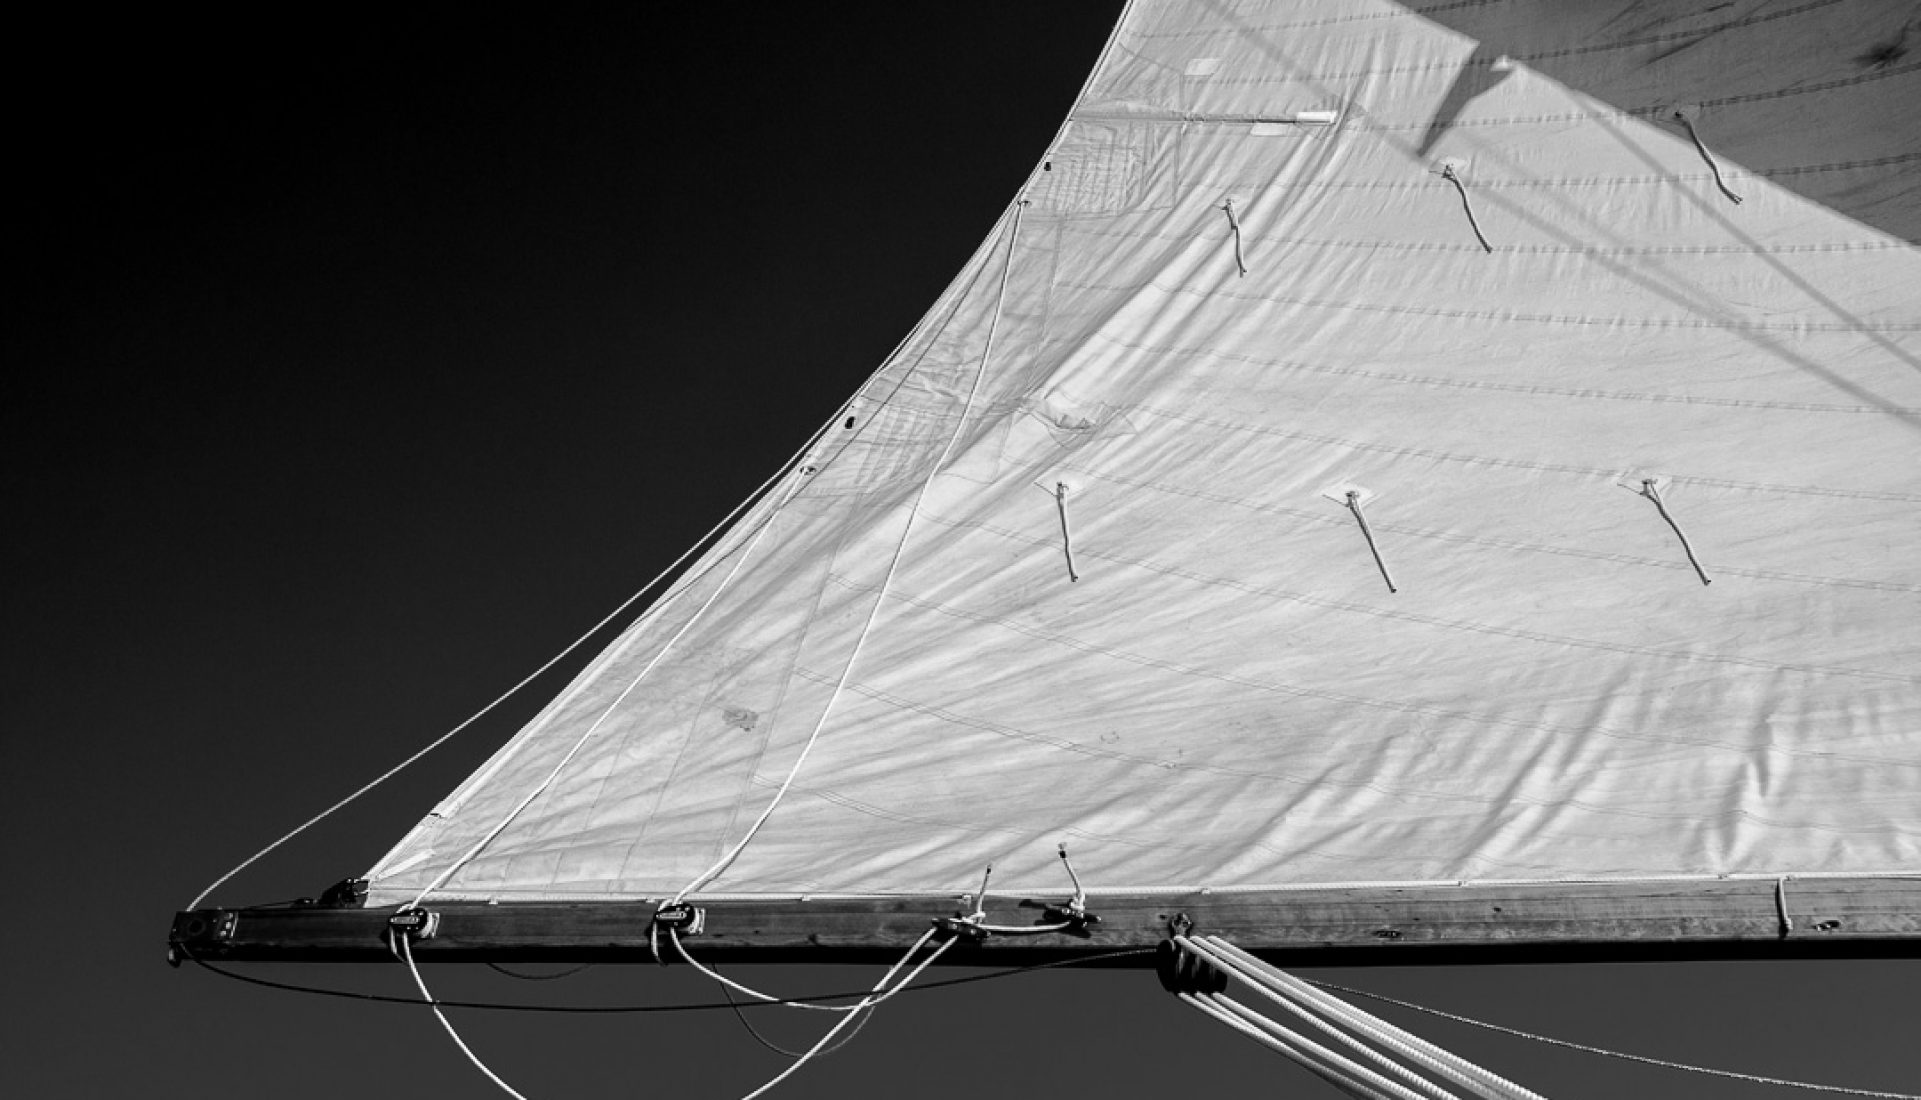 Geometry in Sails